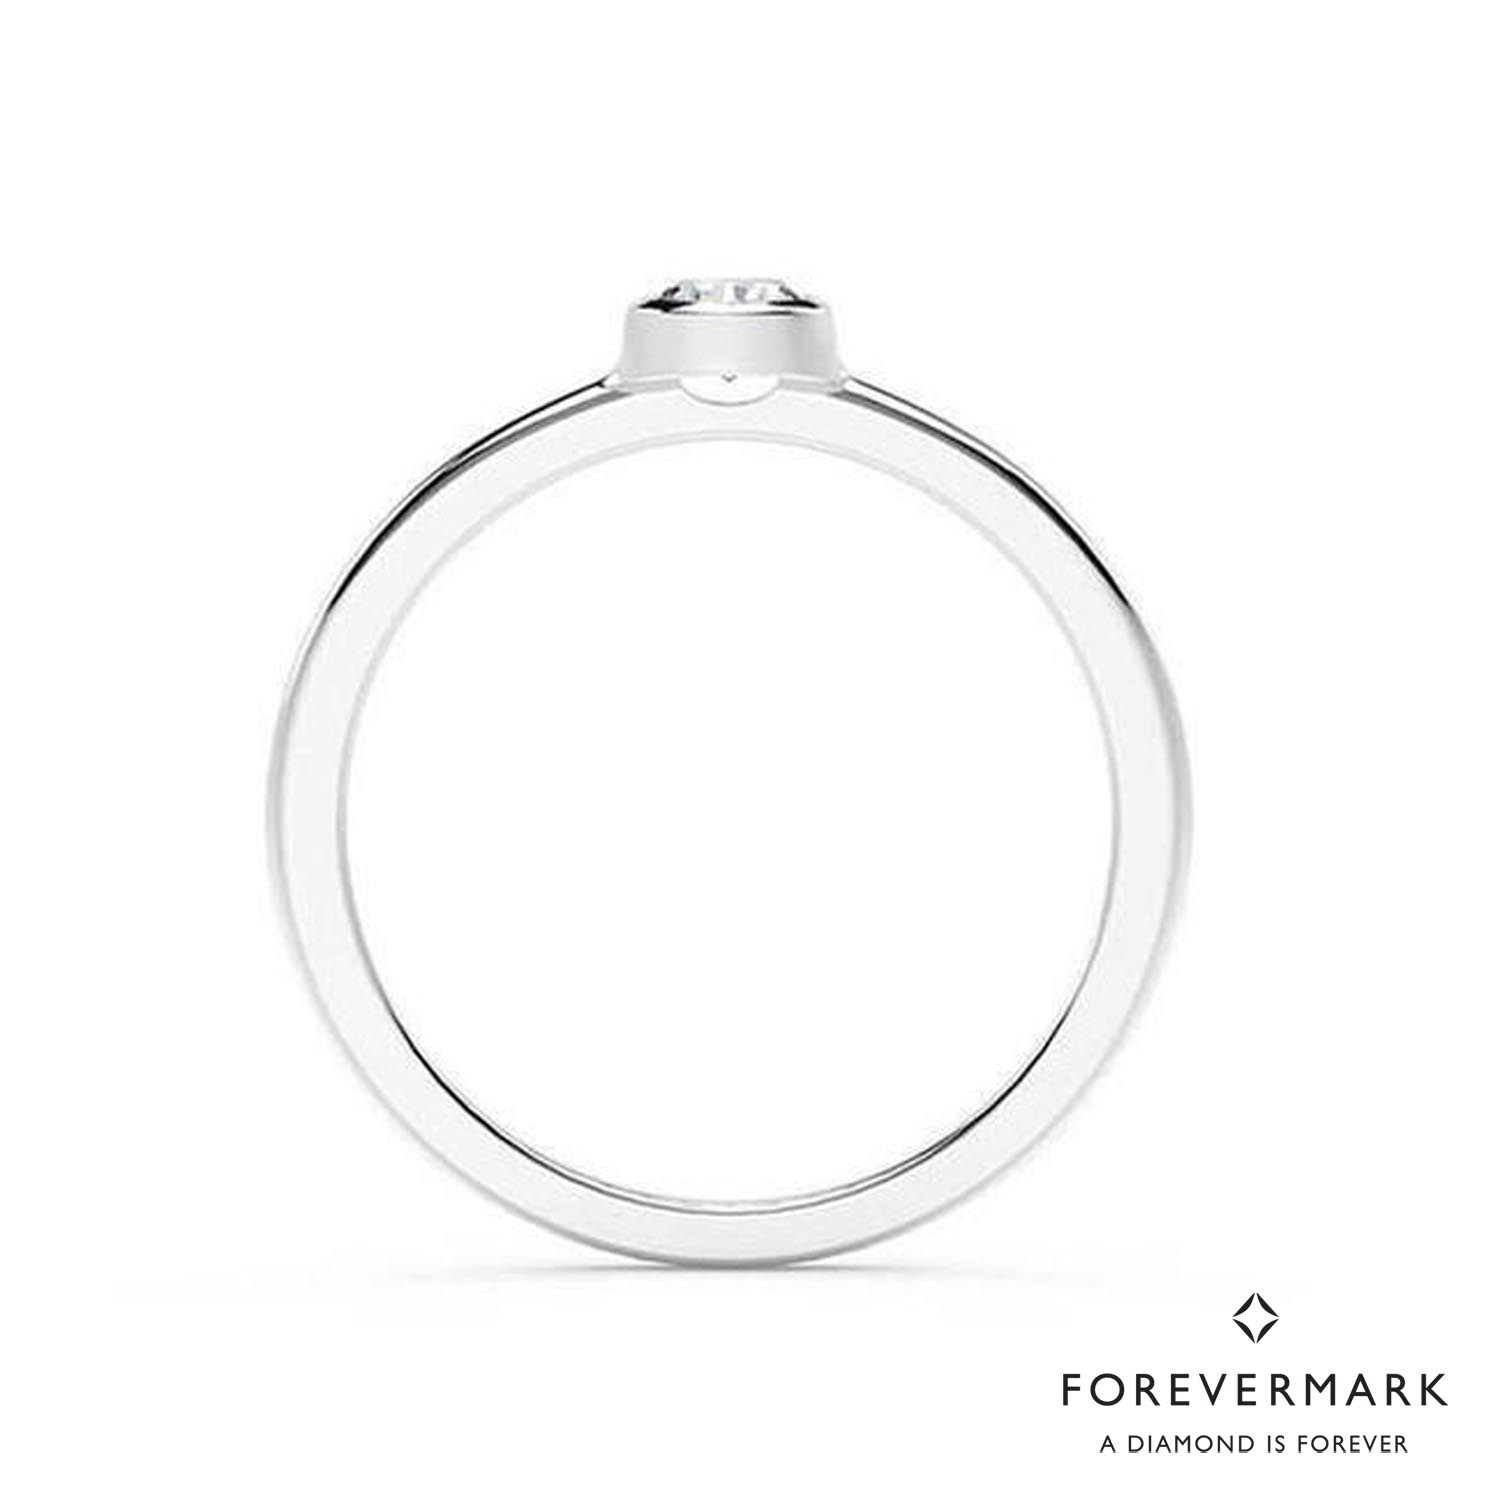 De Beers Forevermark Tribute Collection Classic Bezel Stackable Ring in in 18kt White Gold (1/4ct)